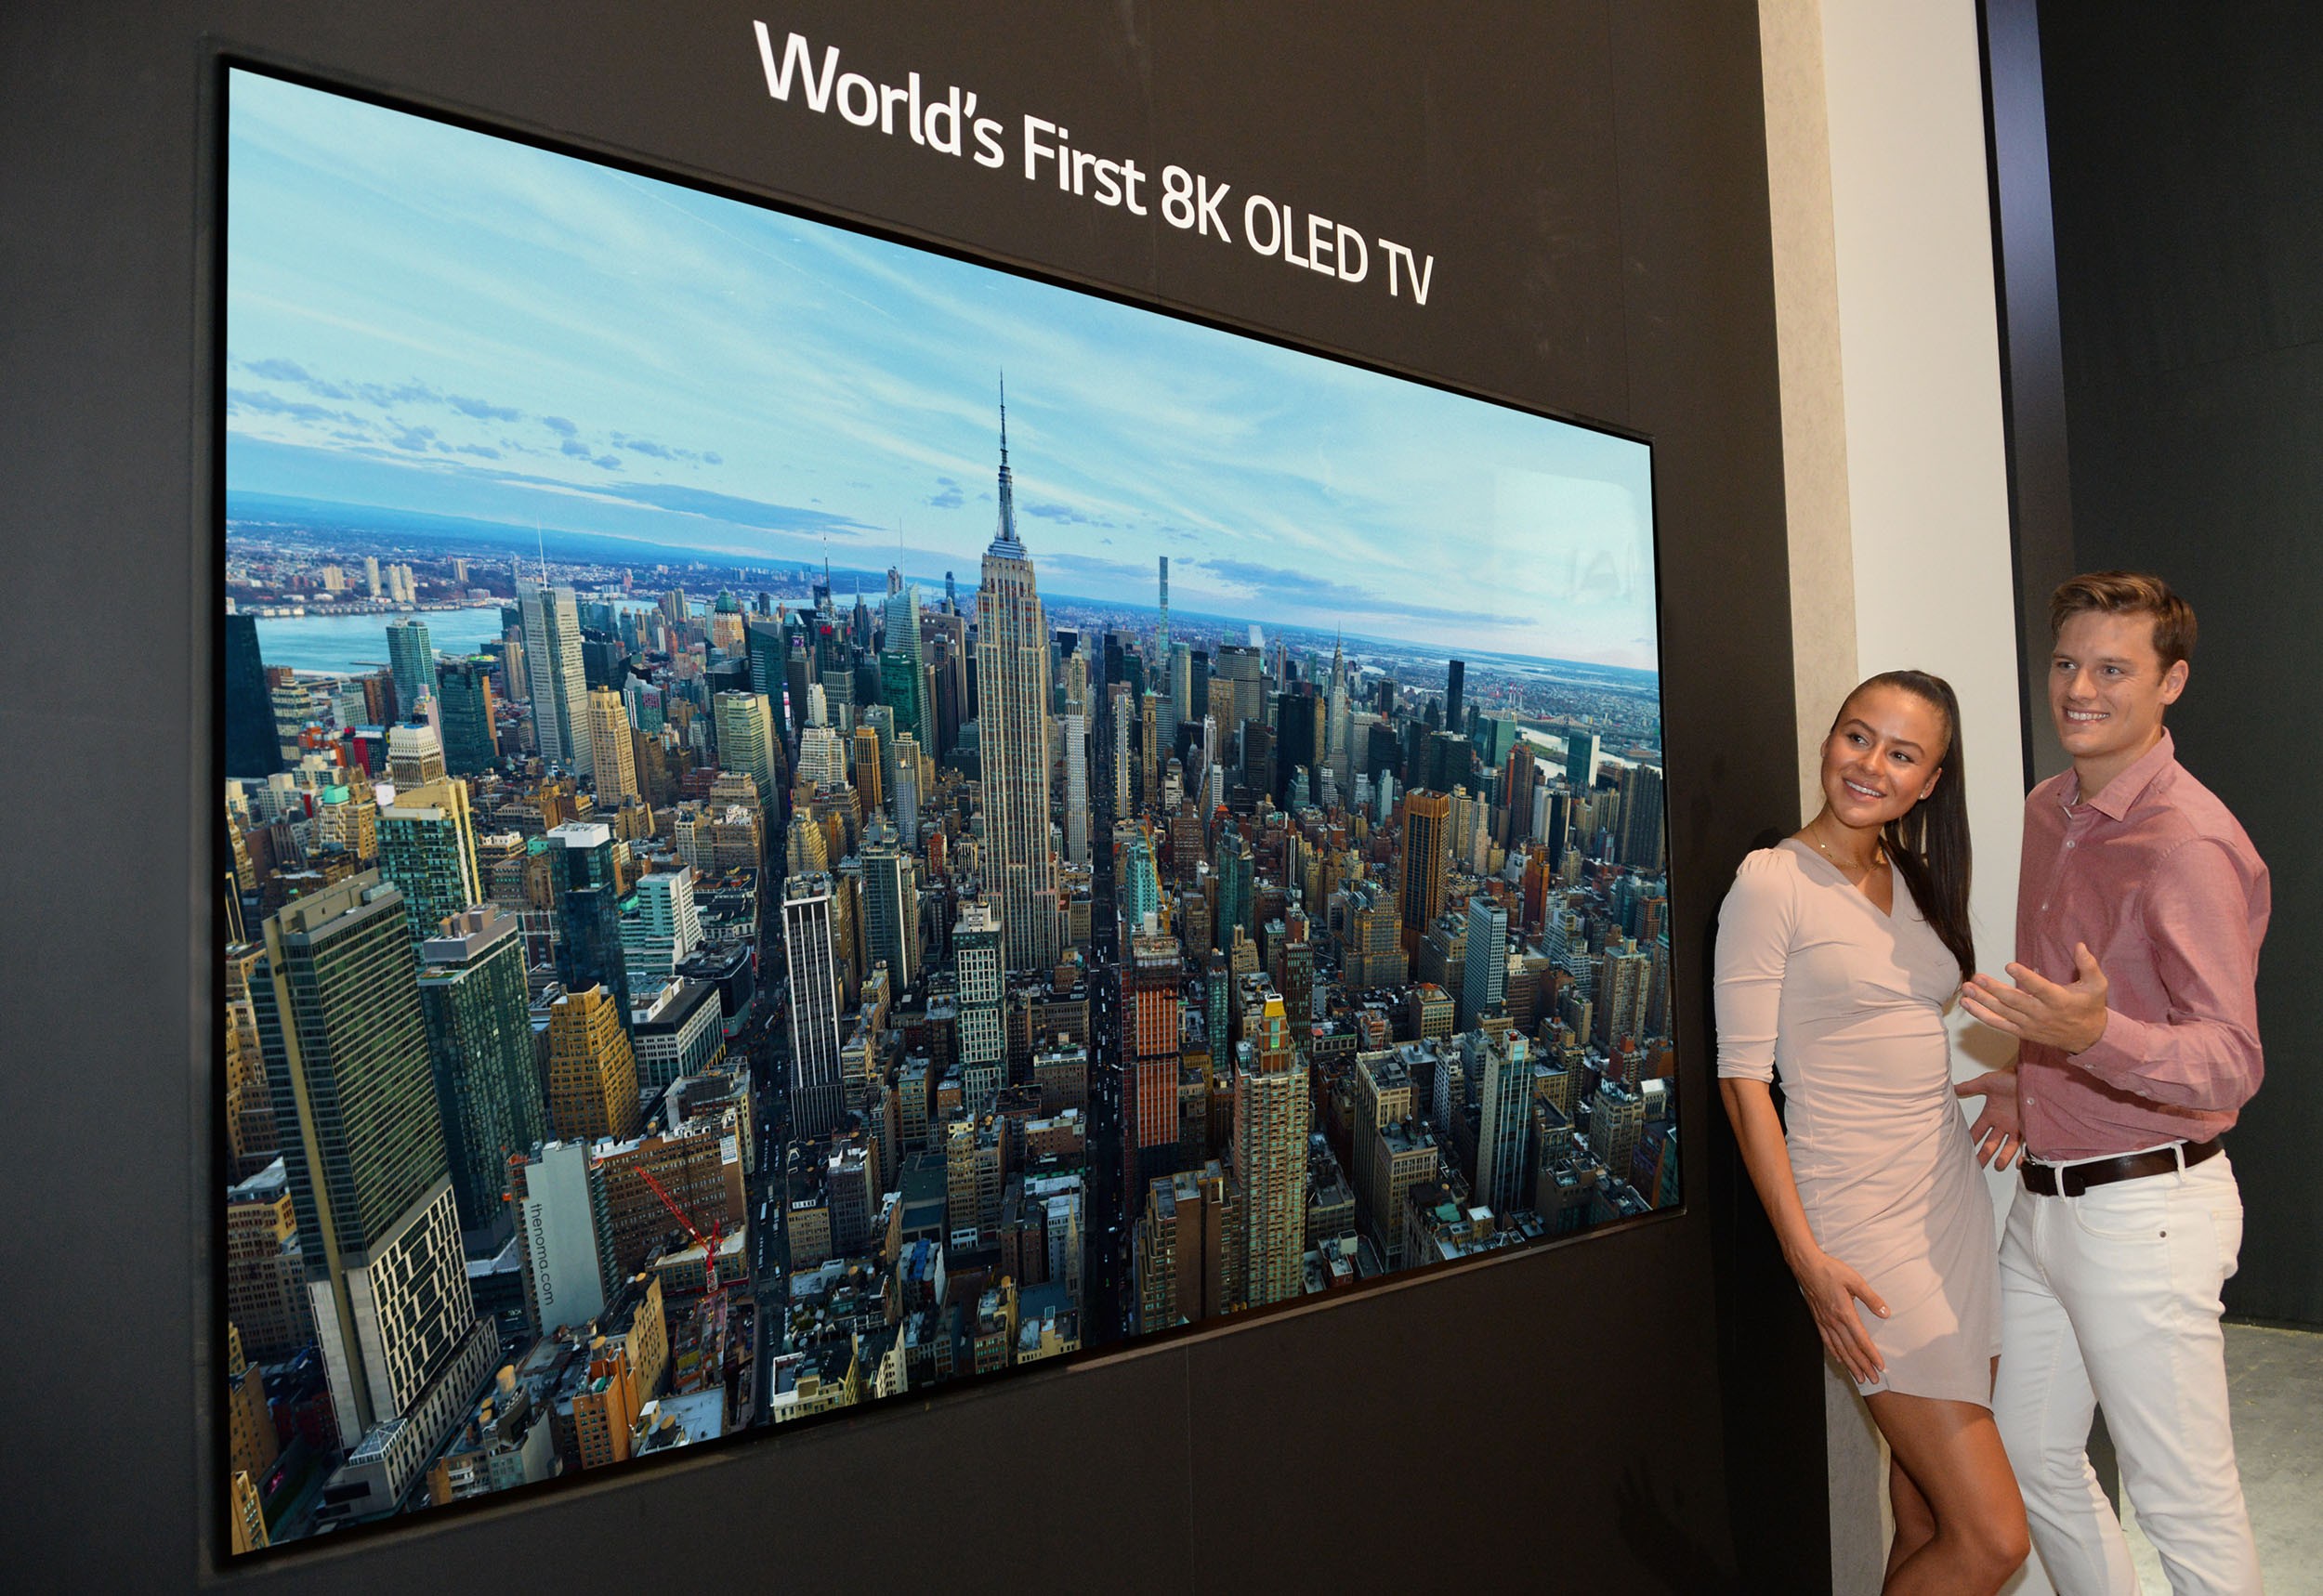 World’s First 8K OLED TV display at IFA 2018, with a male and female model standing on the right side